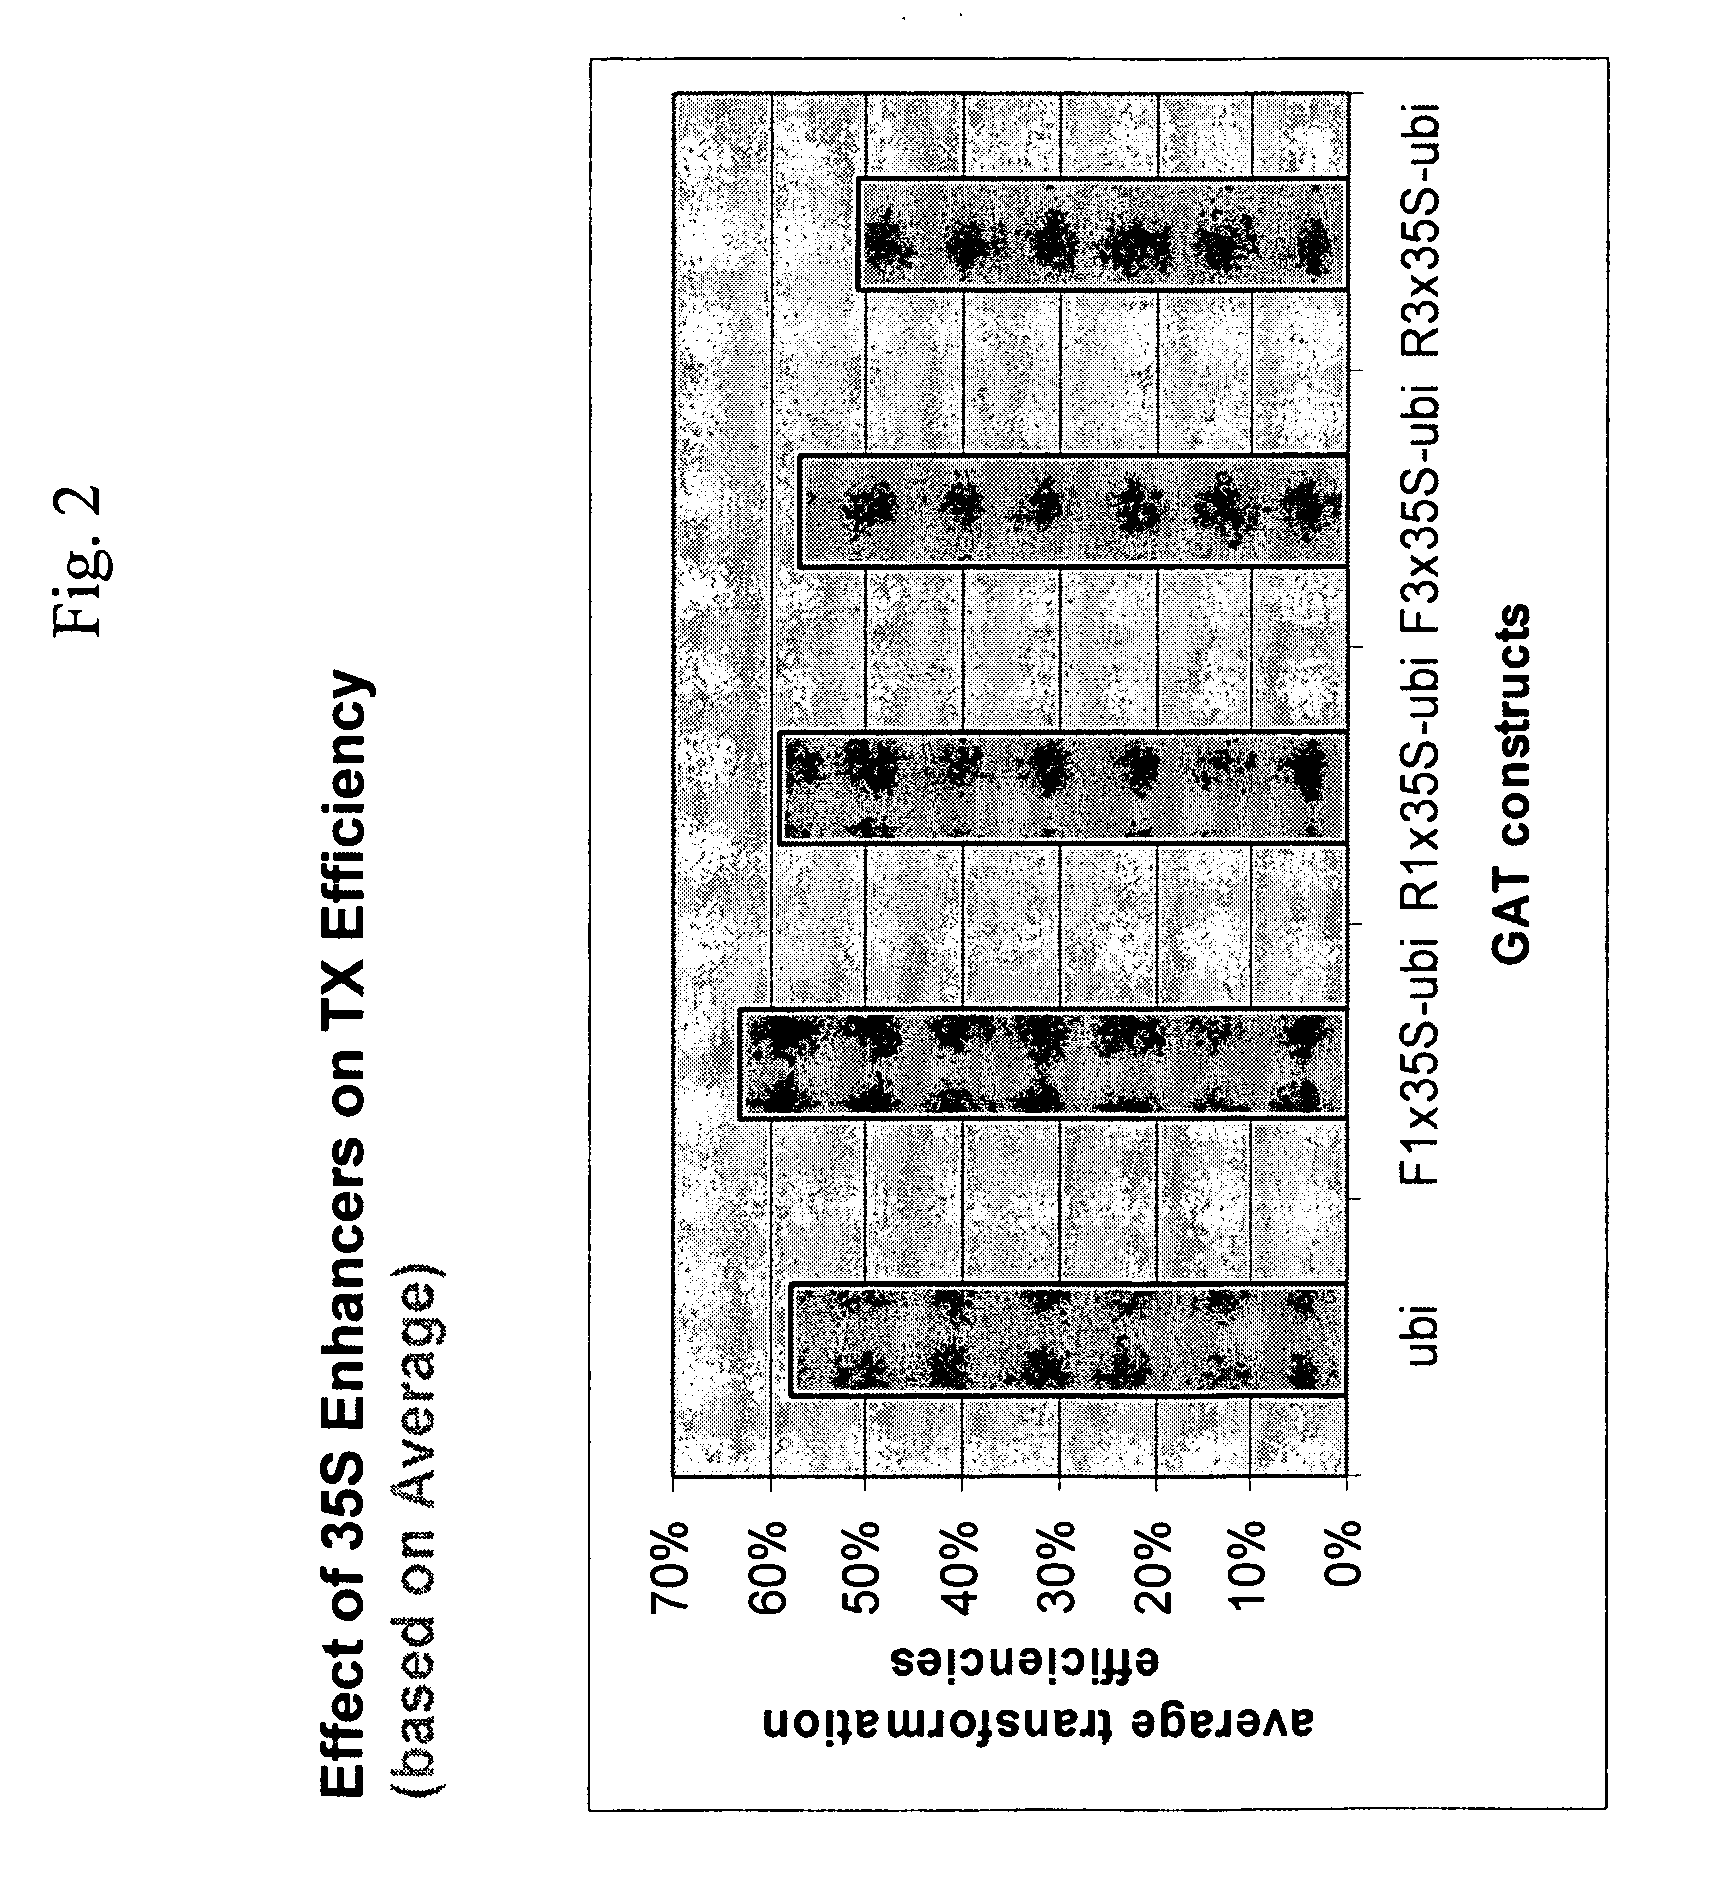 Methods and compositions for controlling weeds